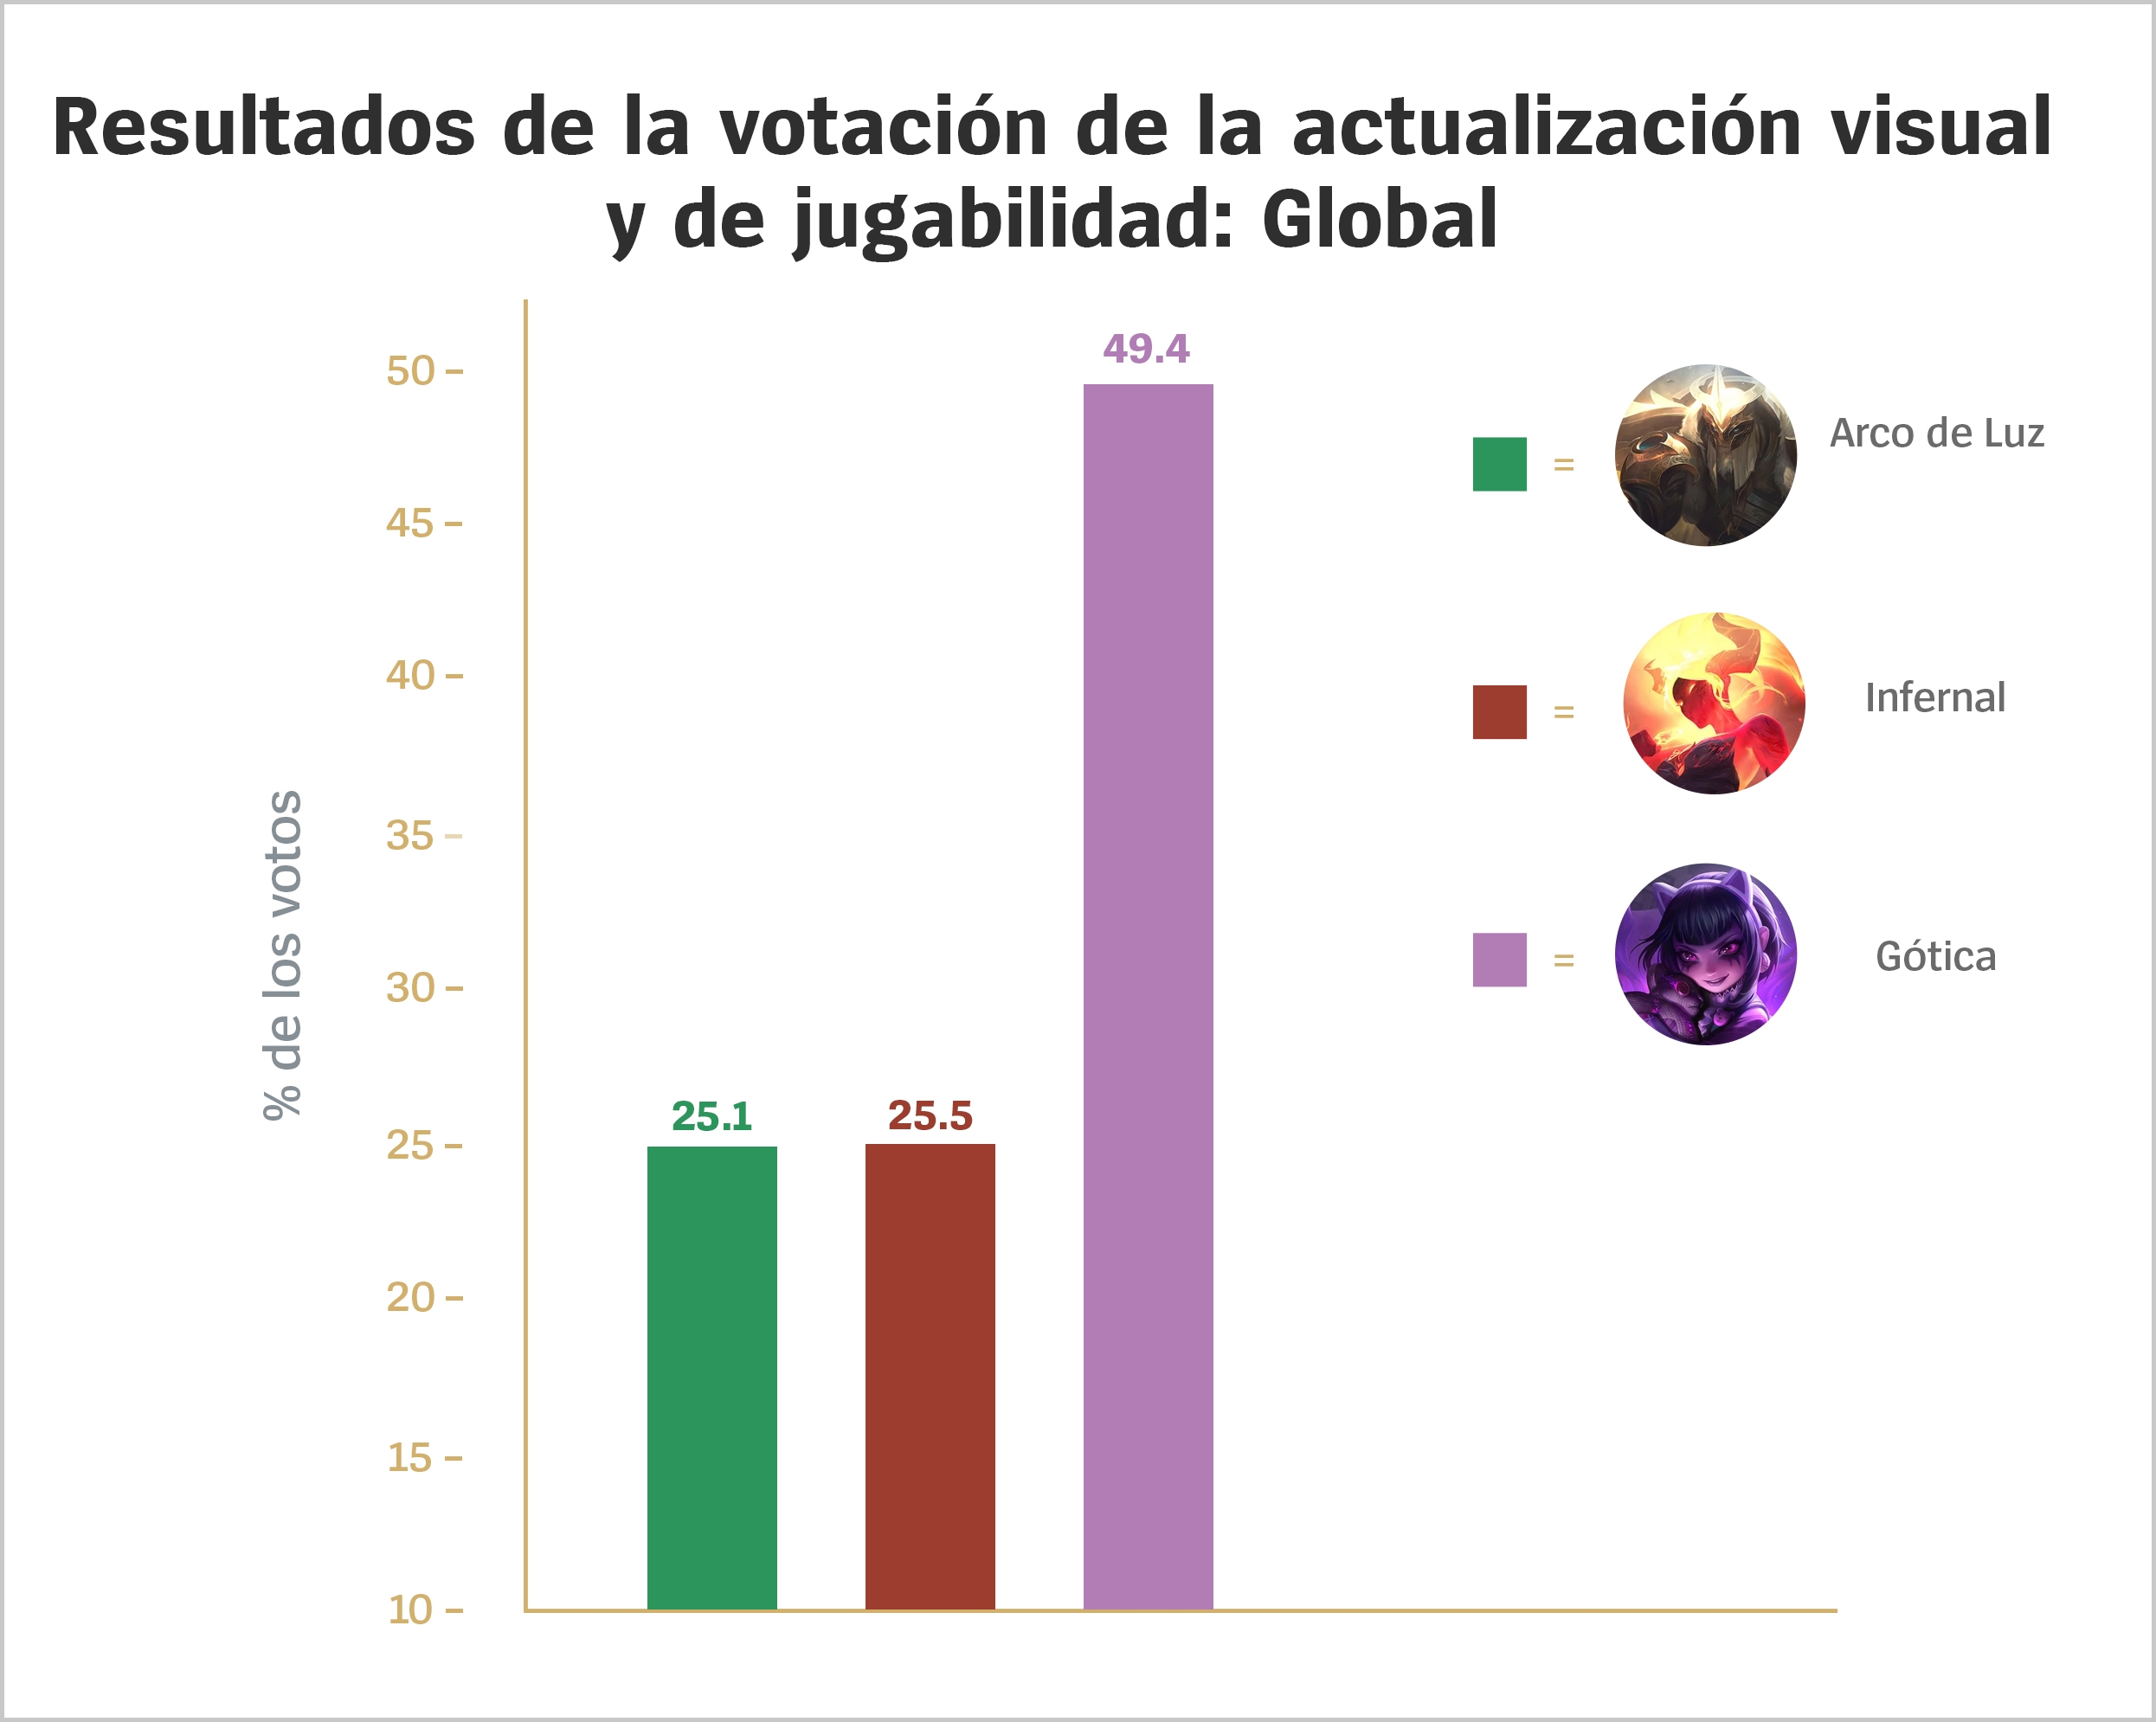 Thematic_Vote_Percentages_Global_For_Loc-LATAM.jpg